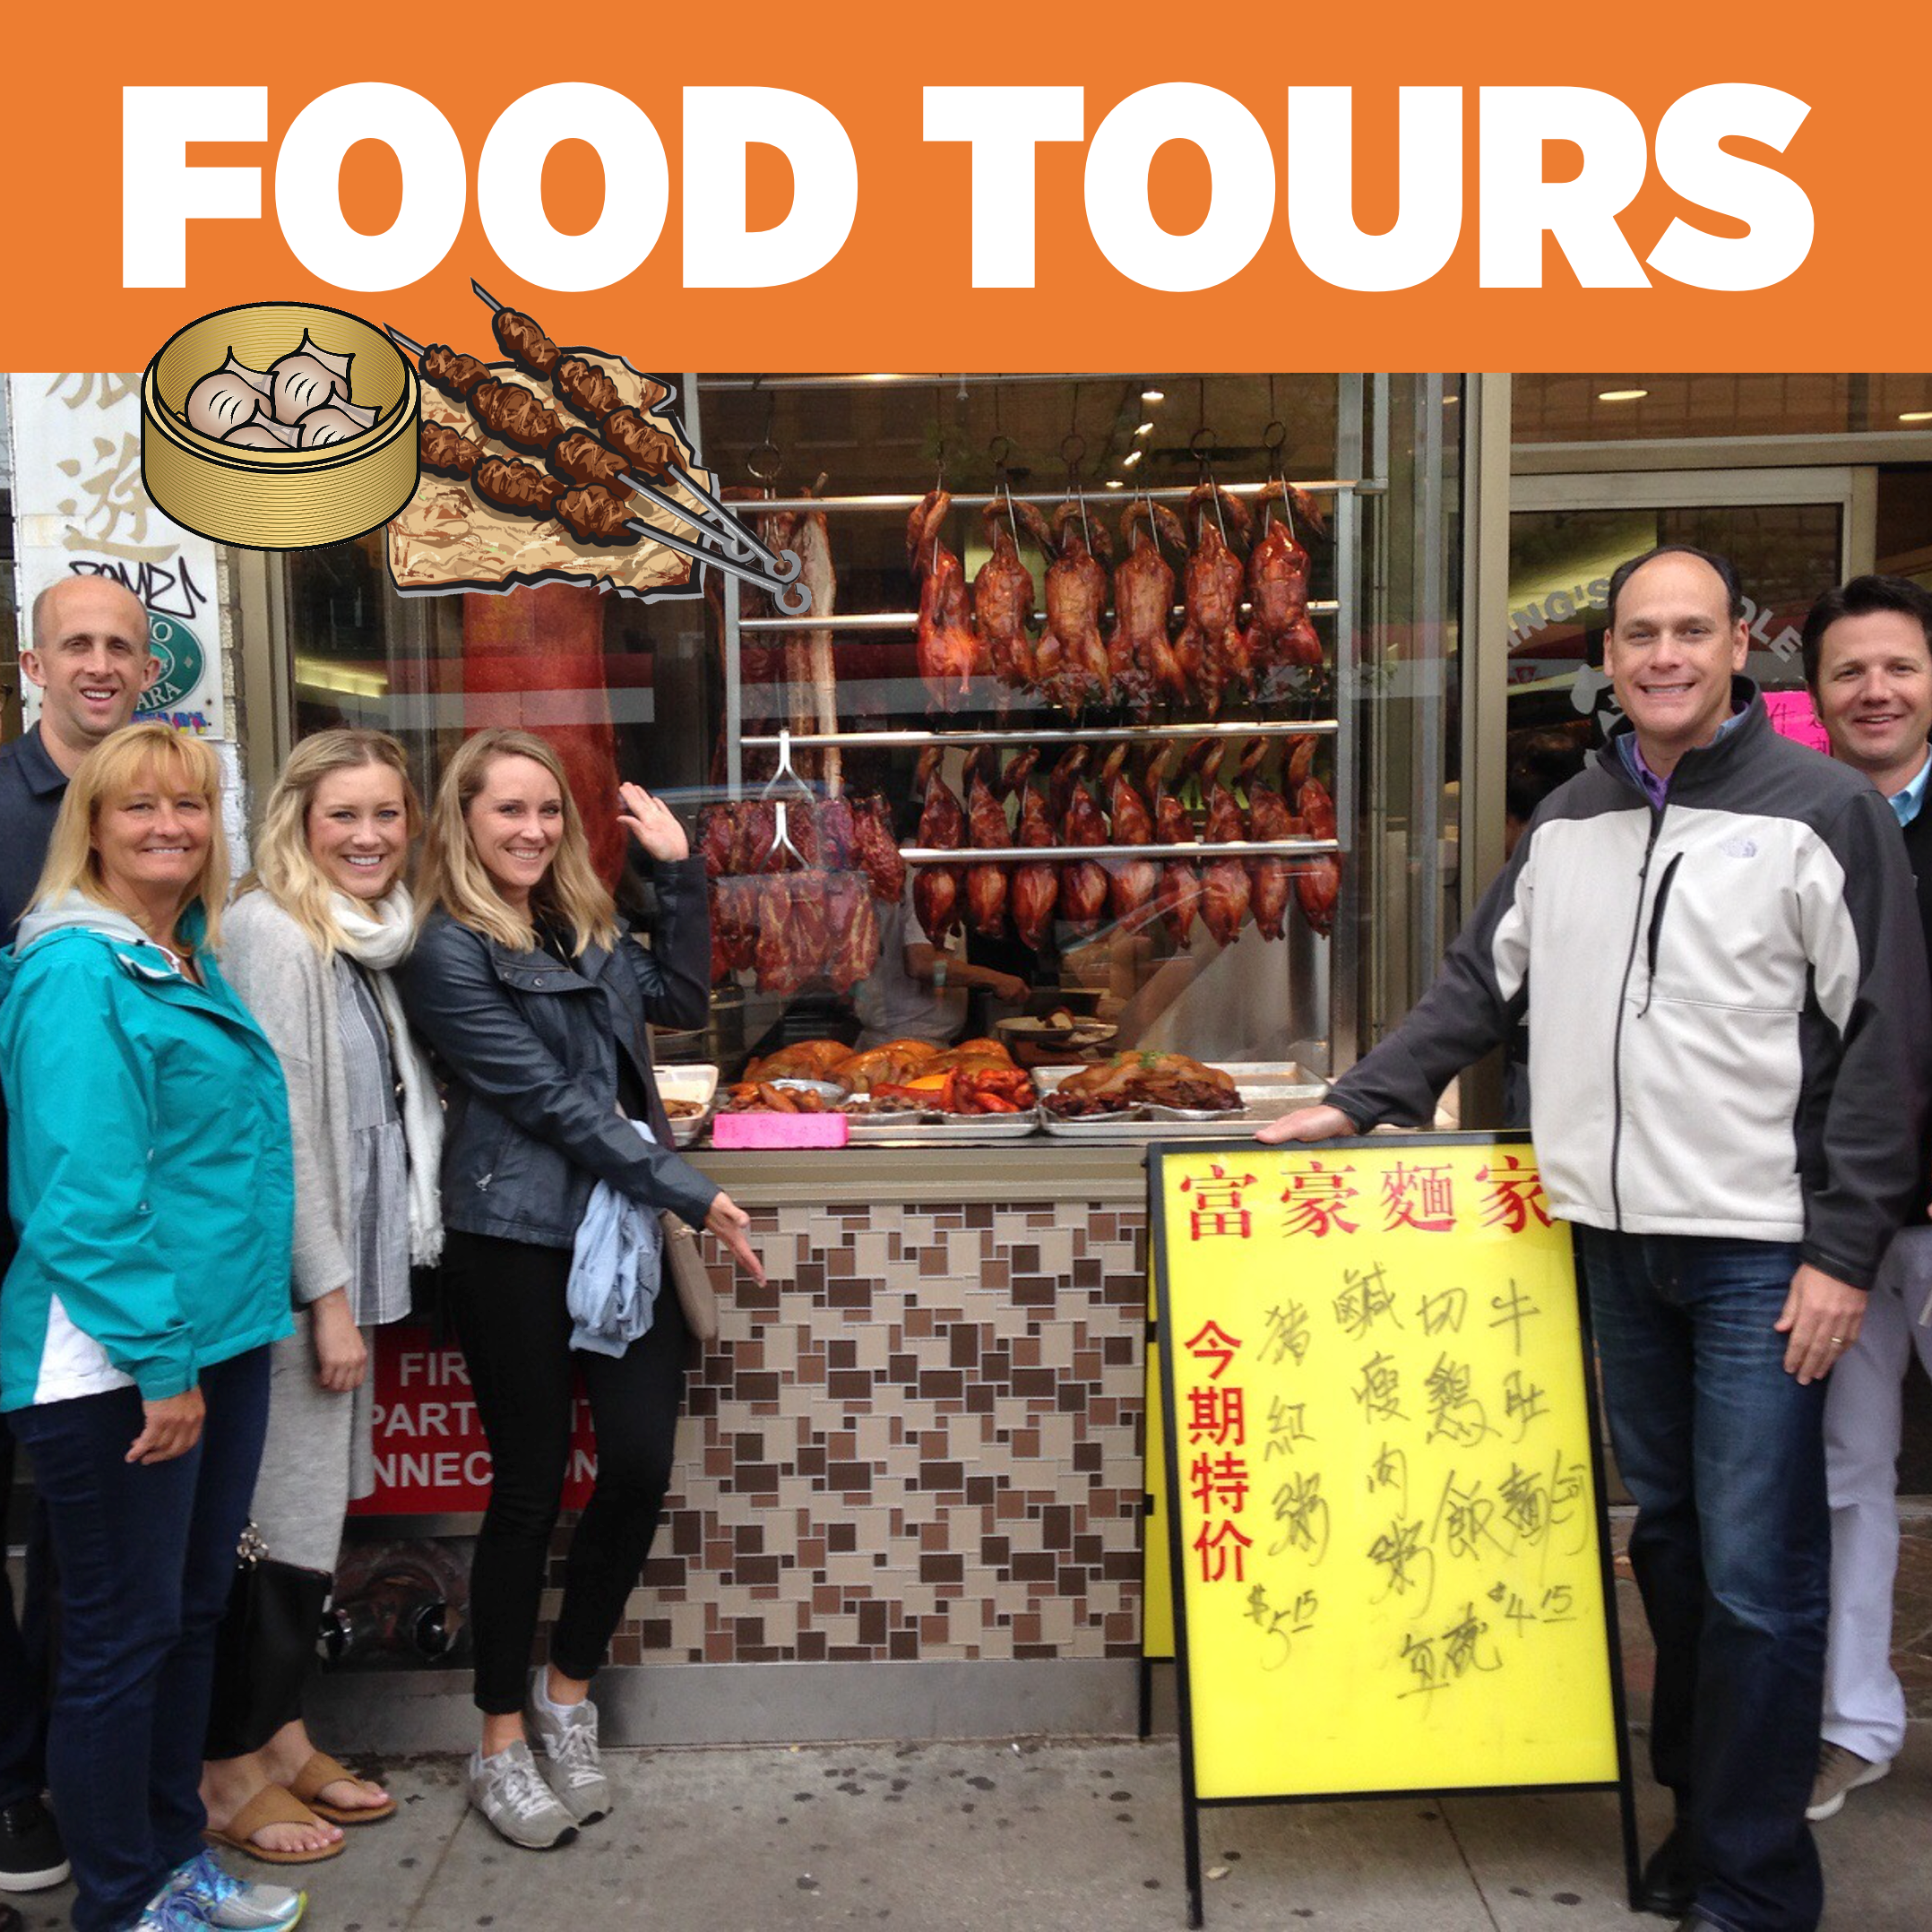 Since 2011, we've hosted thousands of private food tours. Our intimate food tours are perfect for date night, a friends get together or to celebrate birthdays, anniversaries, bridal or bachelor experiences.